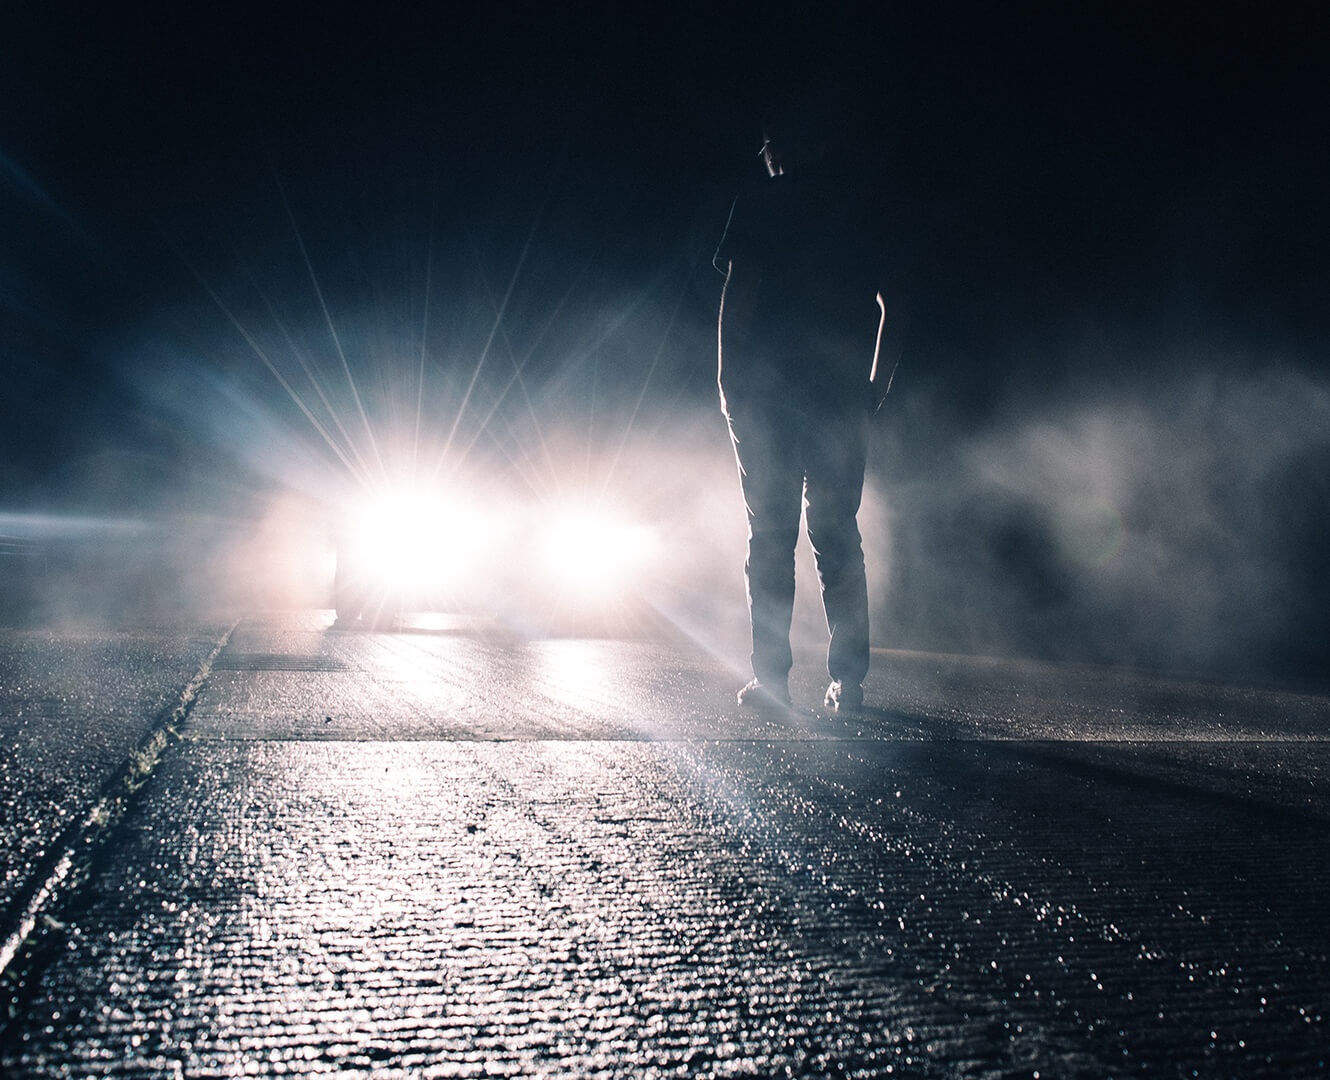 Man stands in front of truck illuminated by the headlights